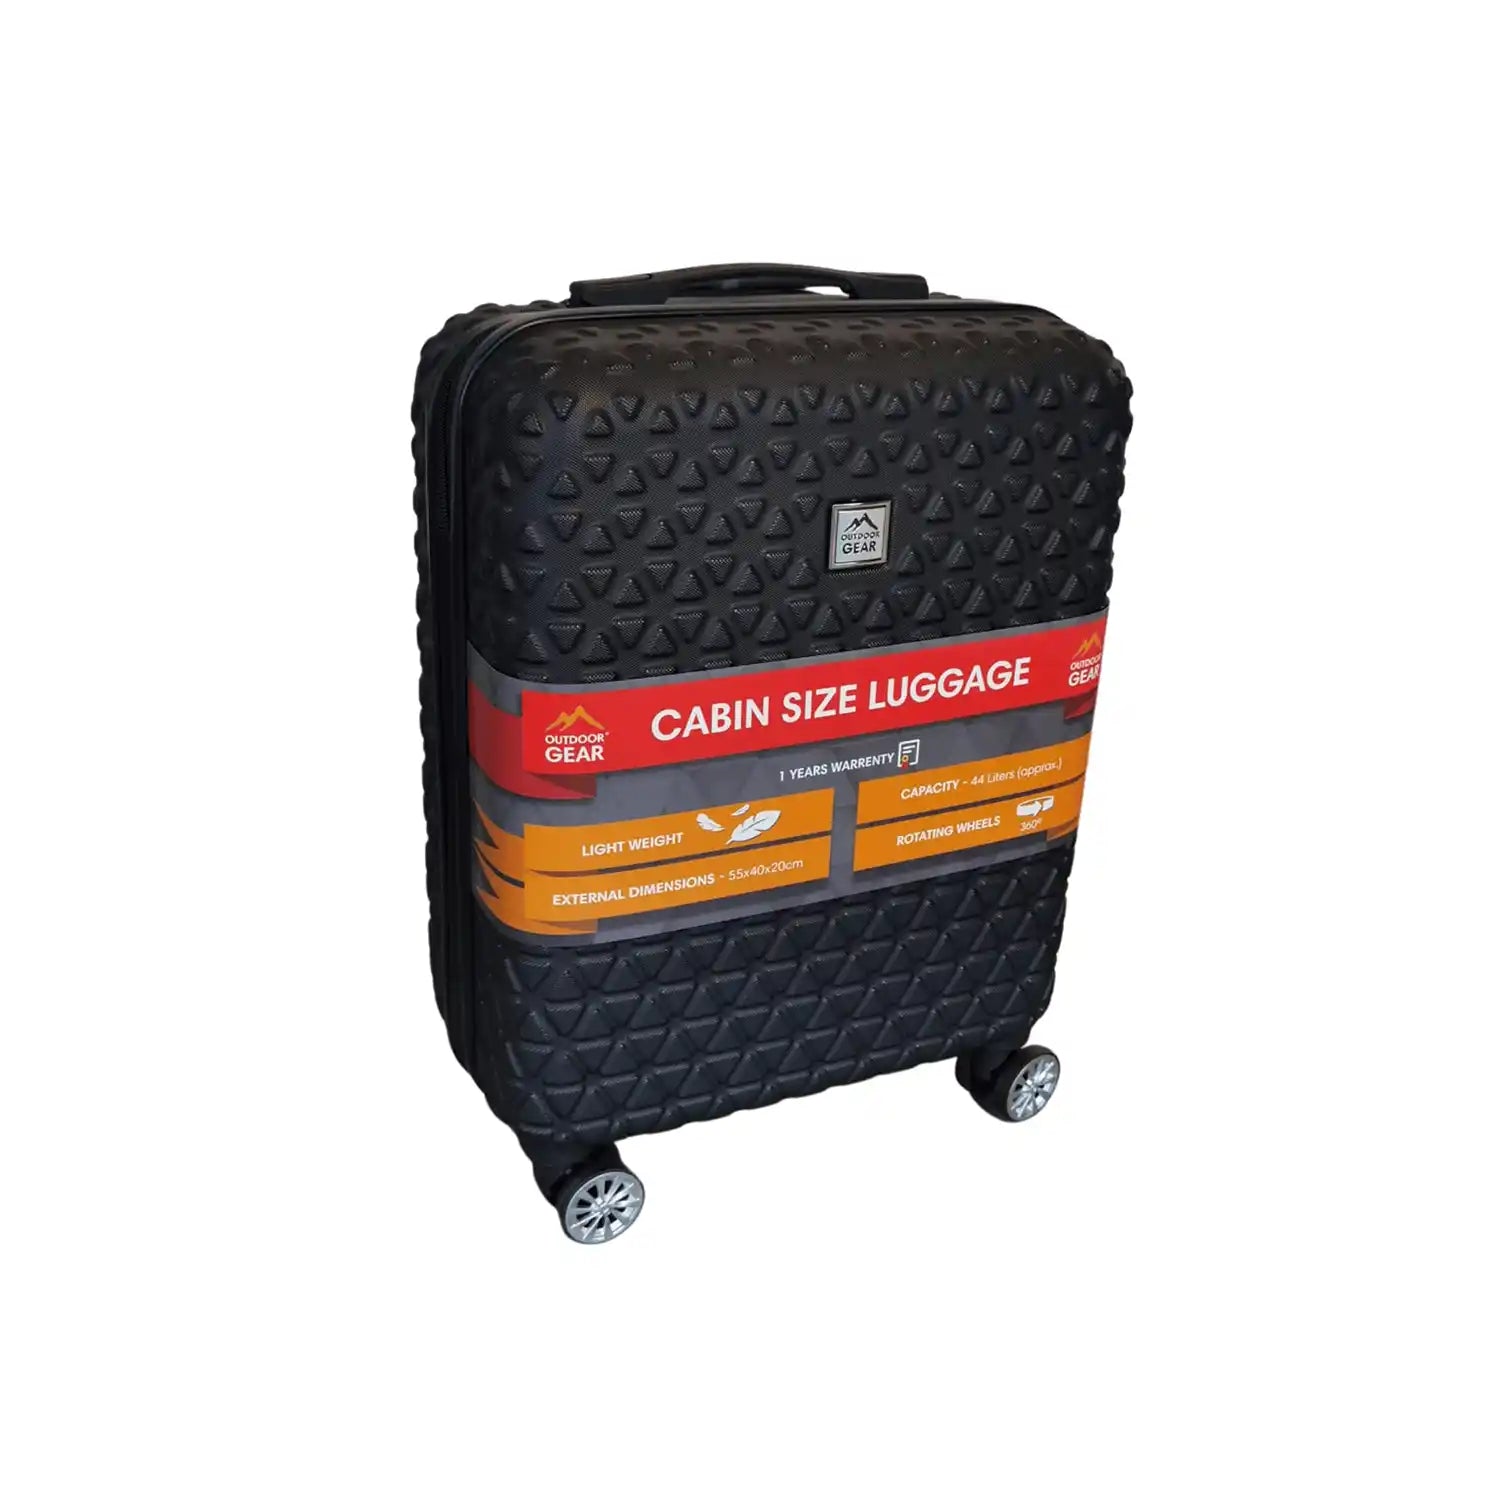 Outdoor Gear Hard Shell Cabin Case - Black 1 Shaws Department Stores